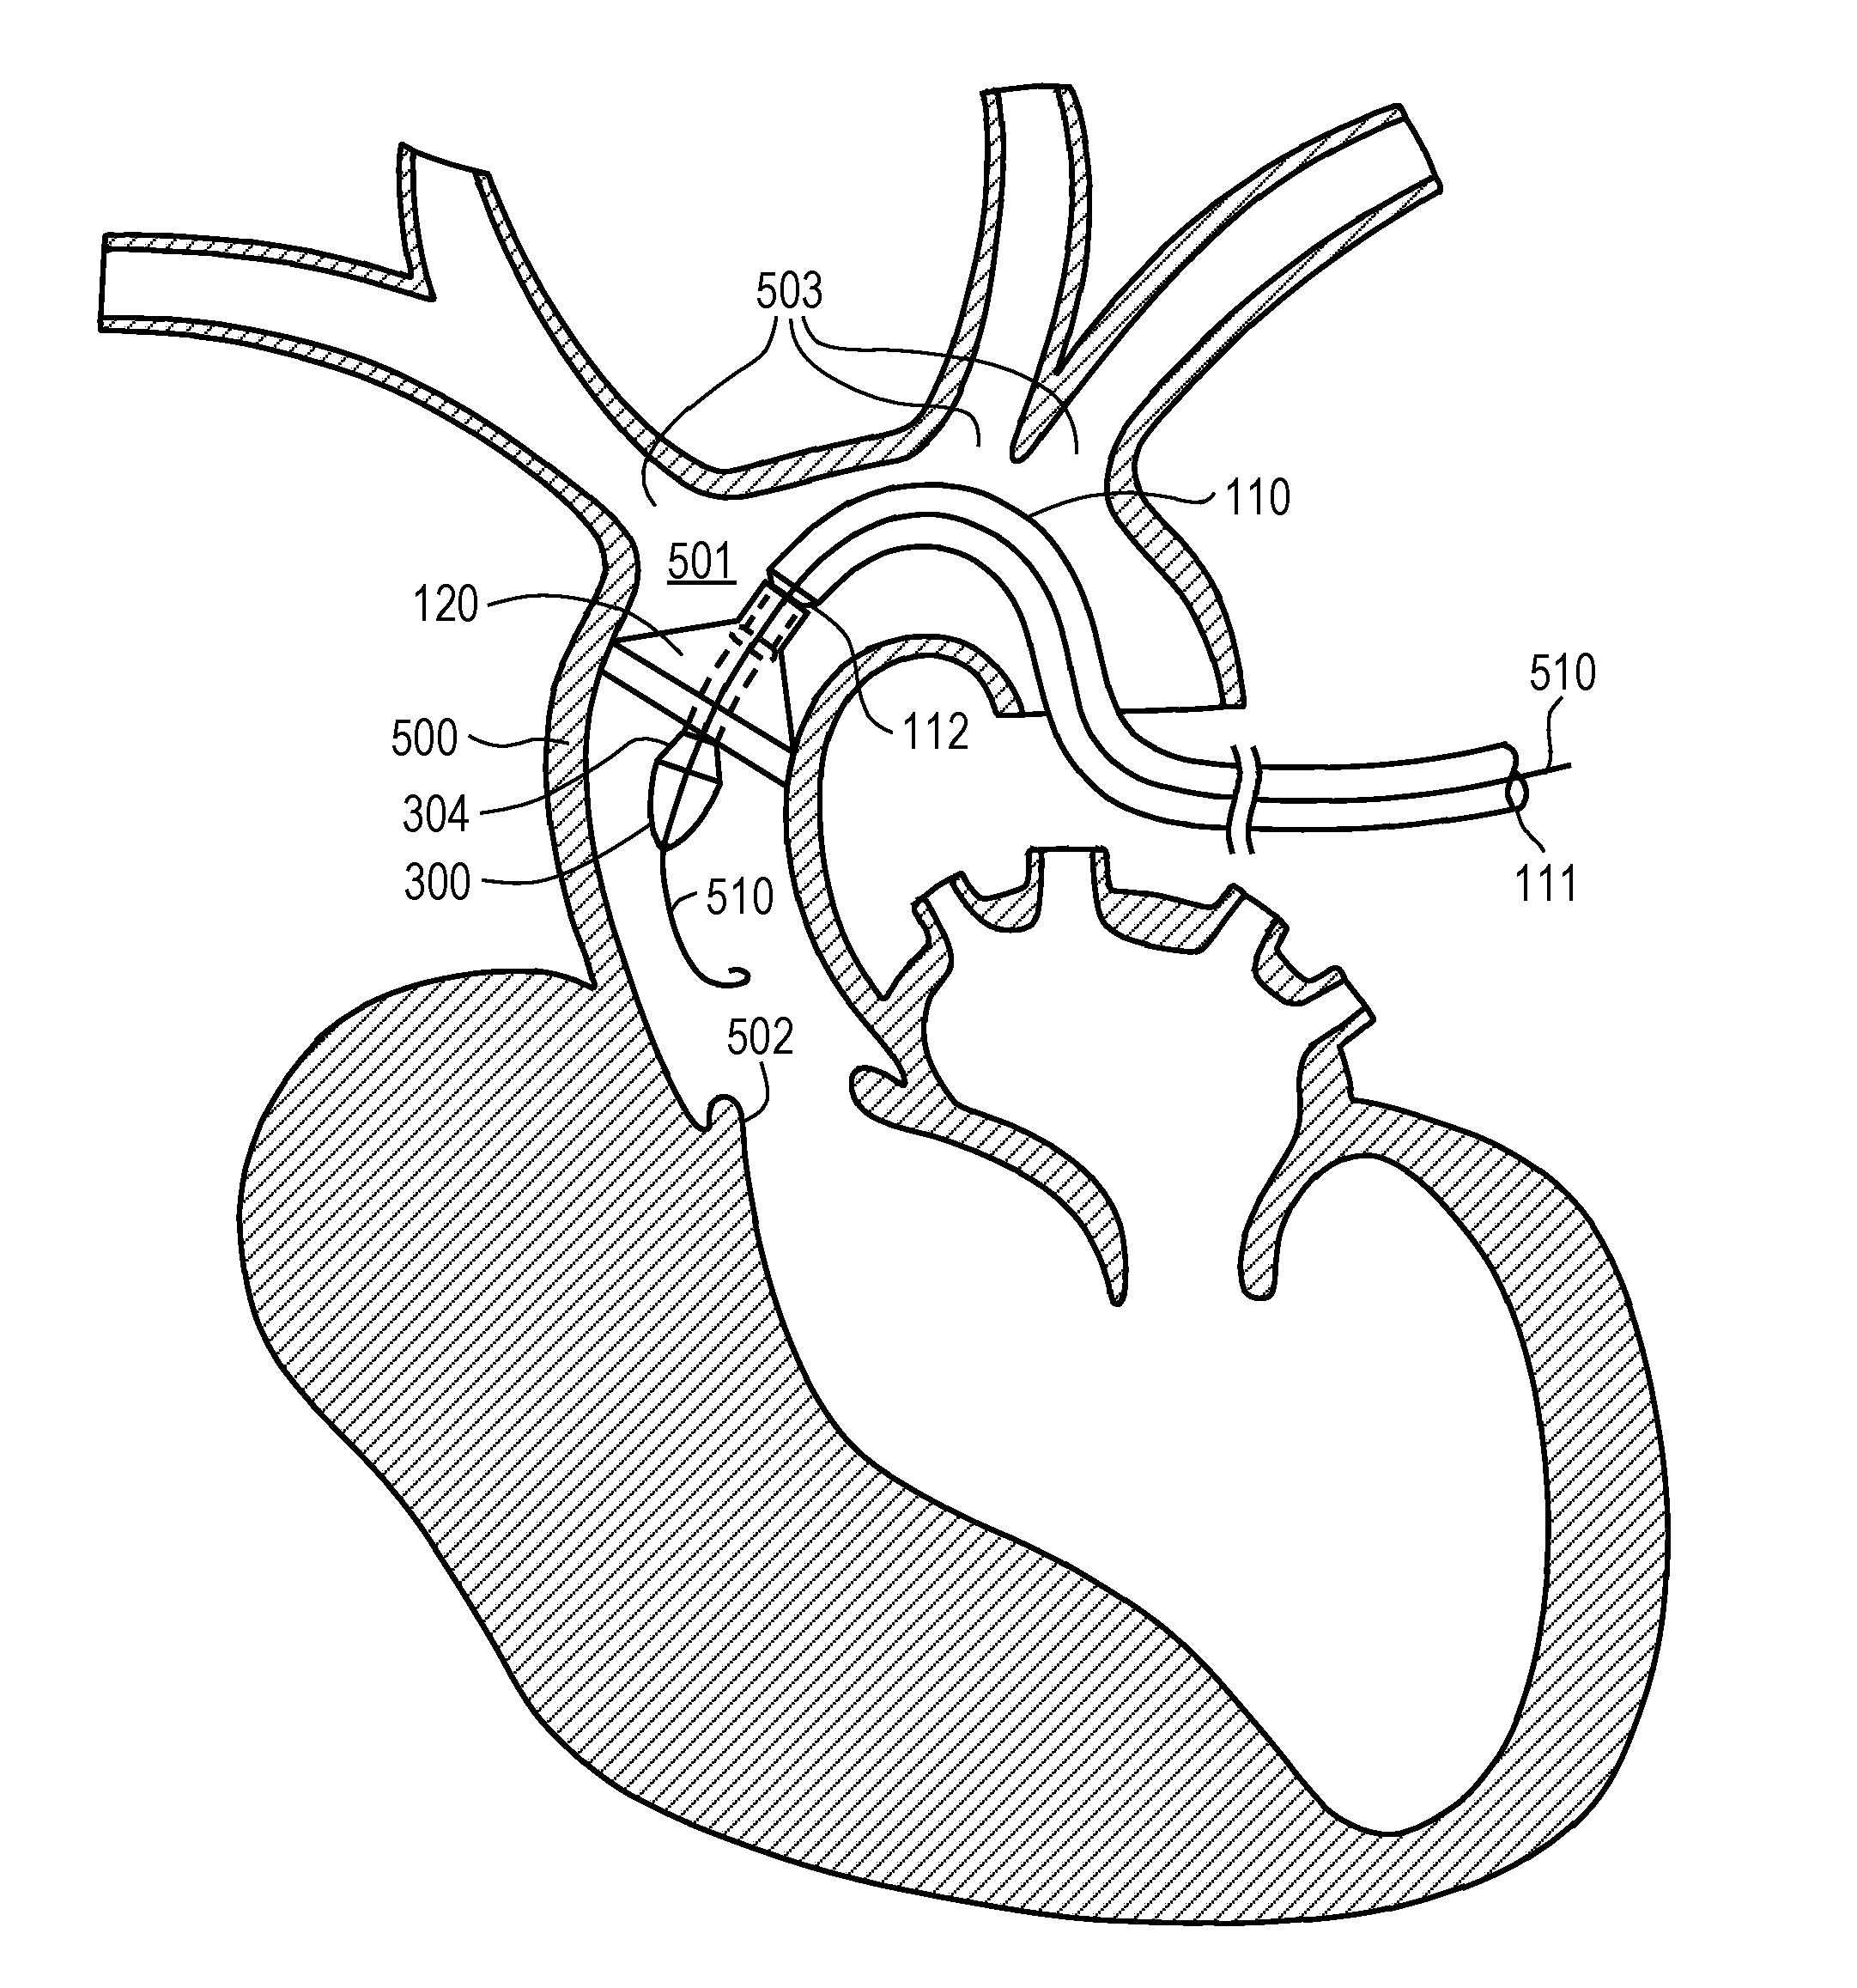 Apparatus and methods for filtering emboli during precutaneous aortic valve replacement and repair procedures with filtration system coupled to distal end of sheath